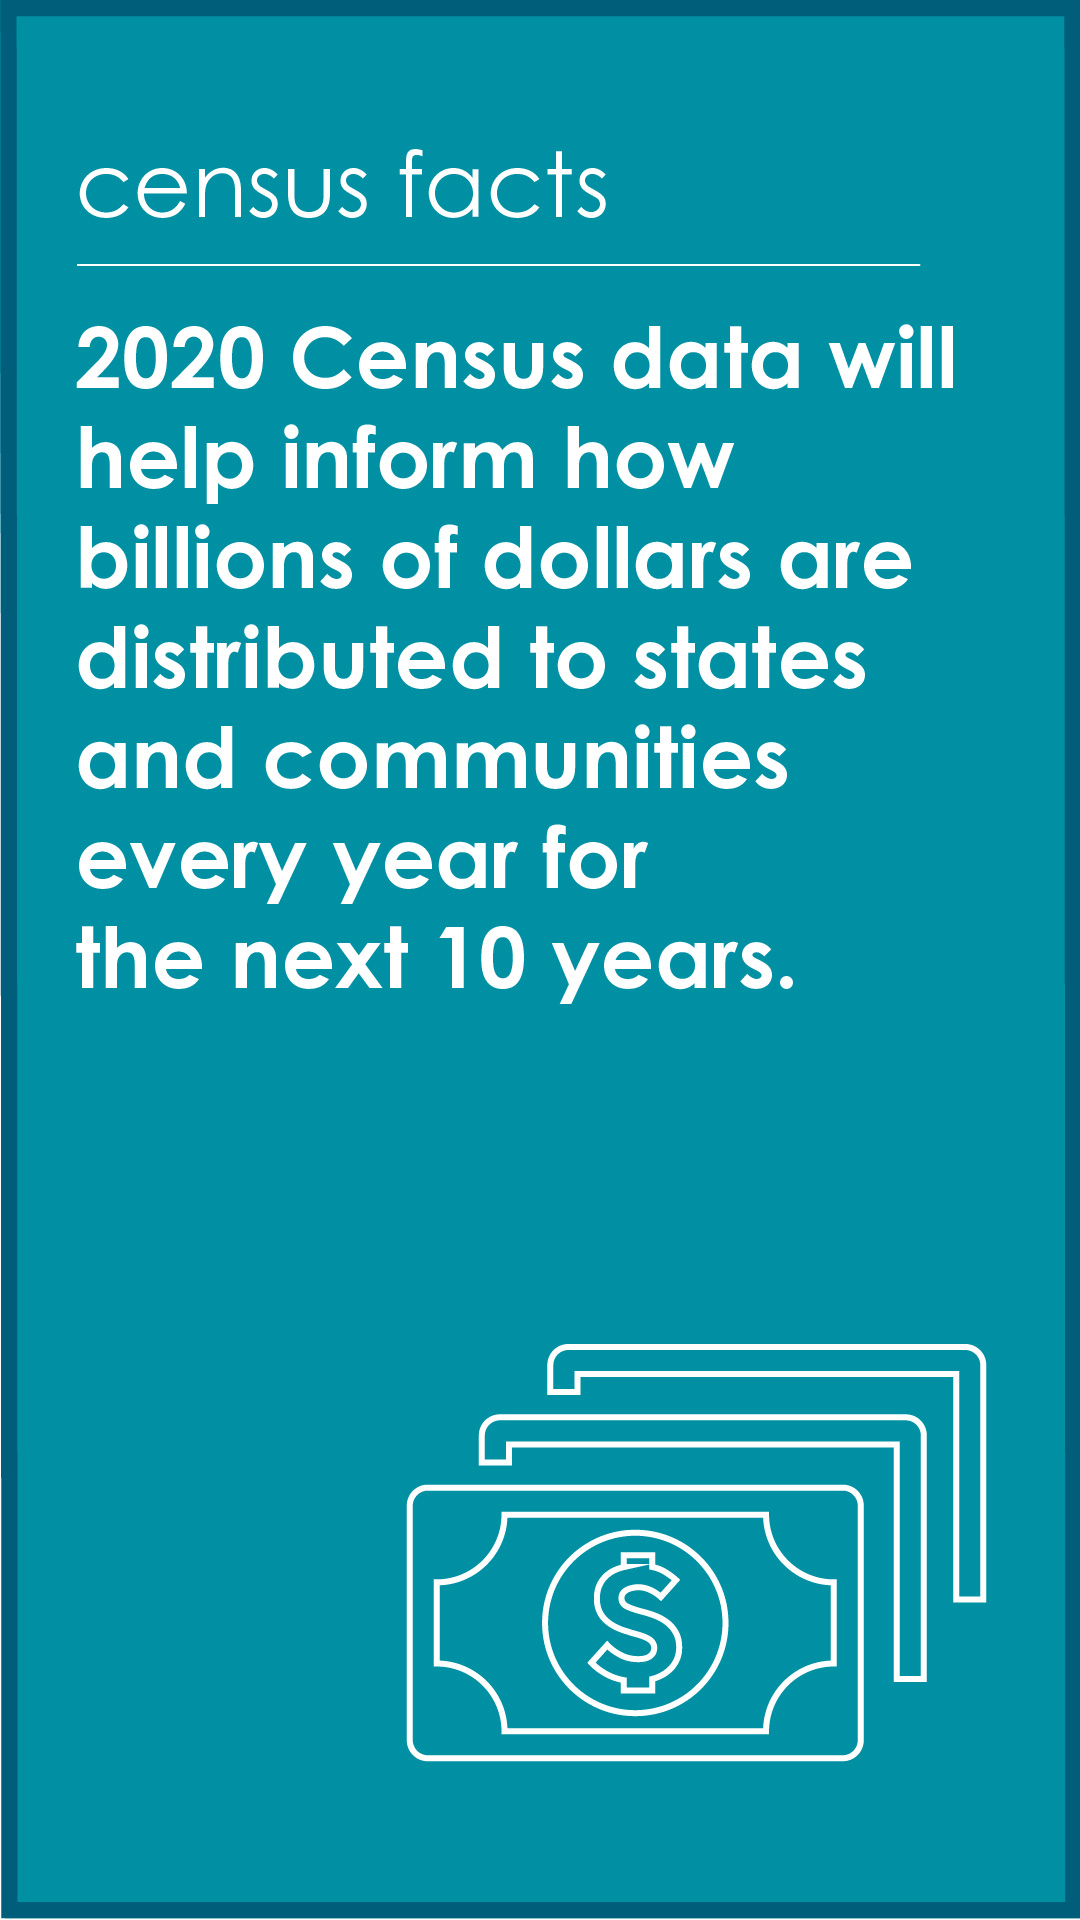 2020 Census Fact - 2020 Census data will help inform how billions of dollars are distributed to states and communities every year for the next 10 years.